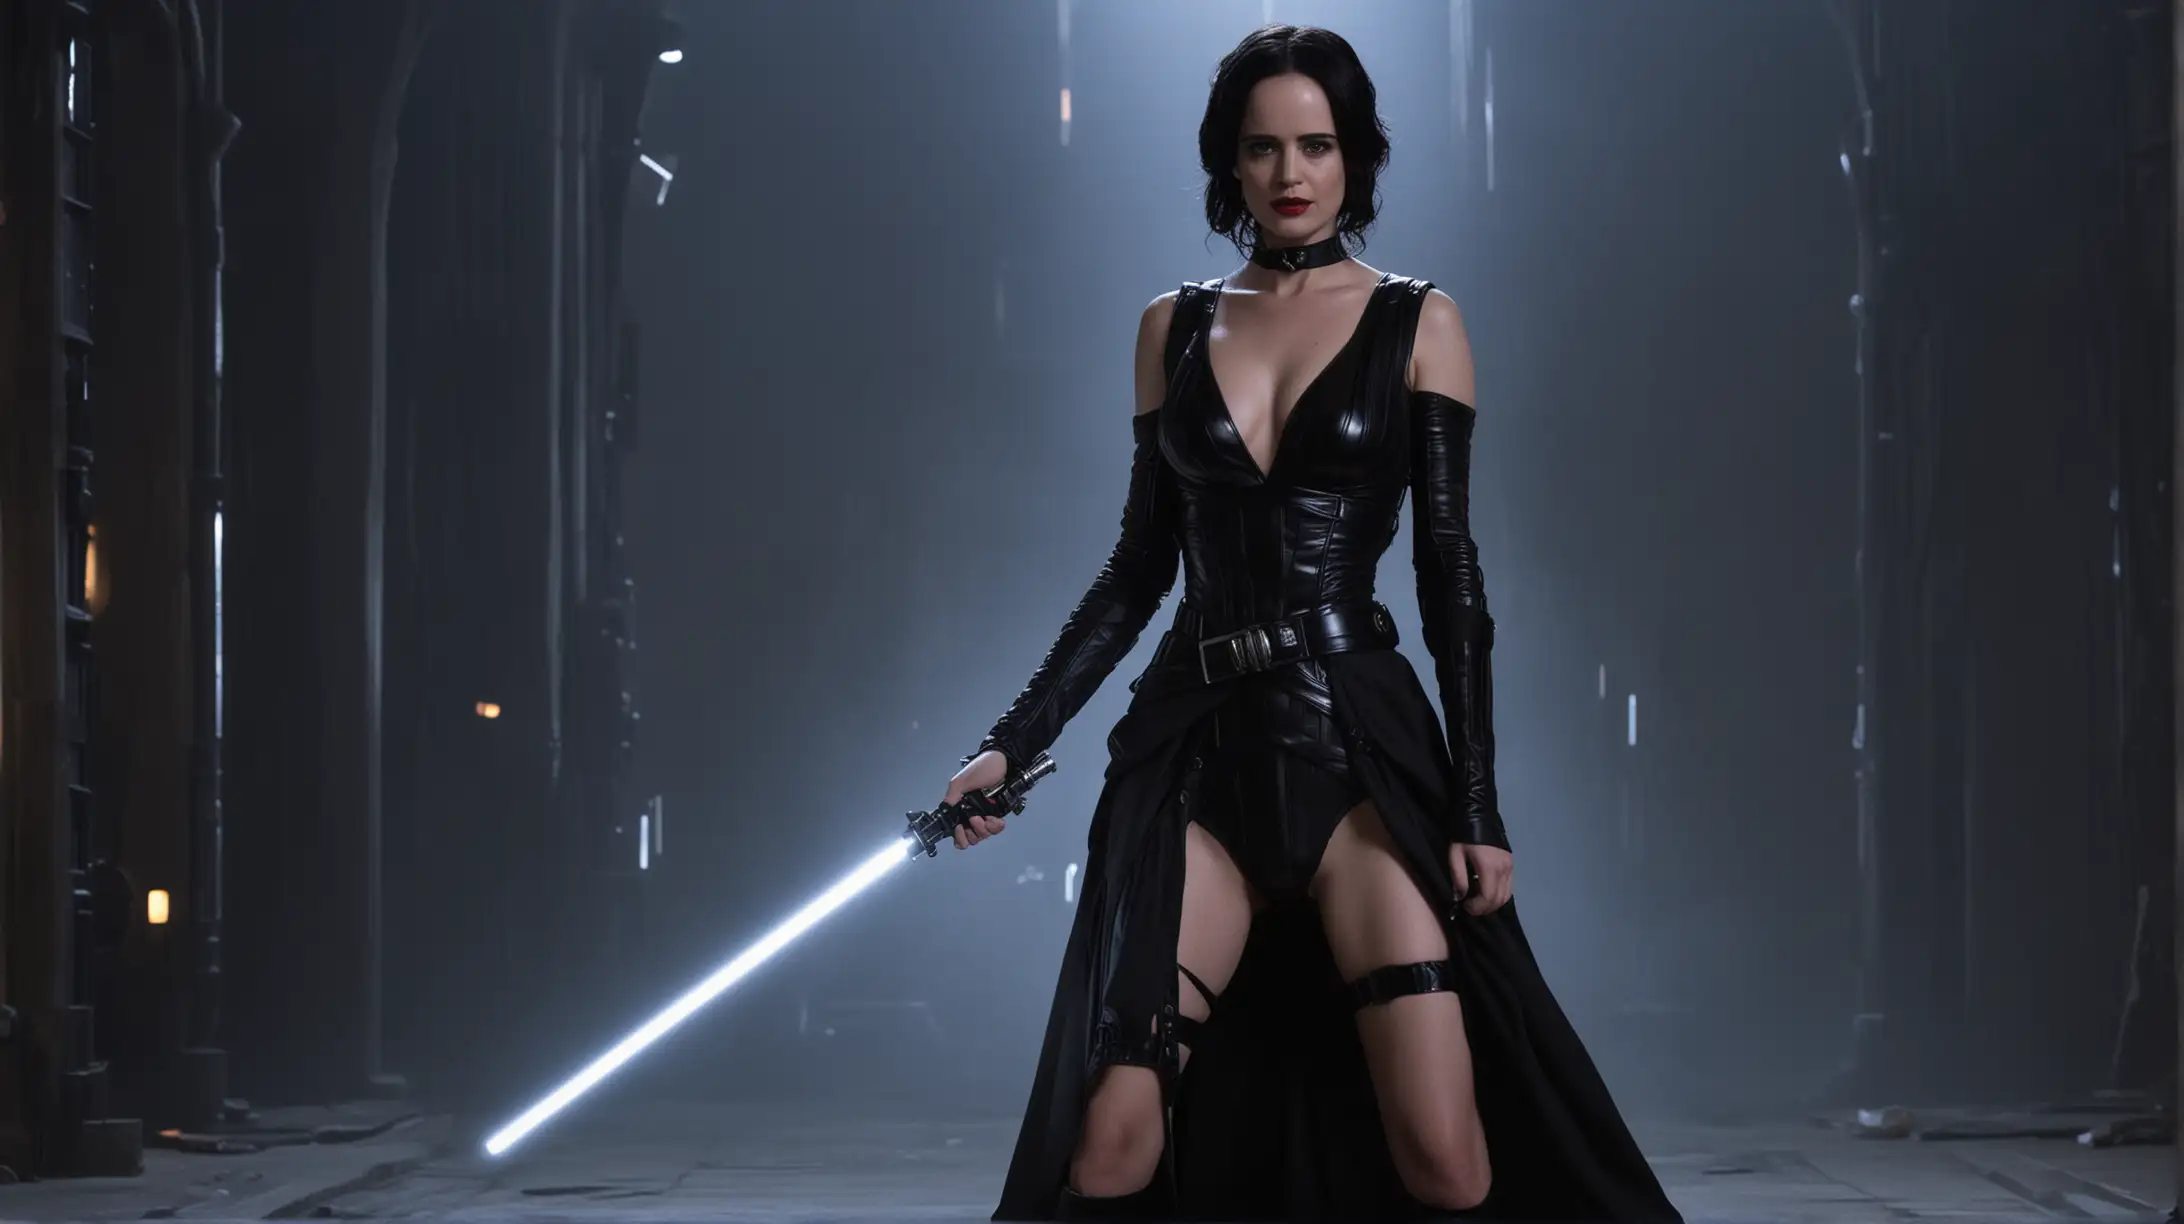 Eva Green Sith Queen in Sexy Black and Canary Clothes with Lightsaber